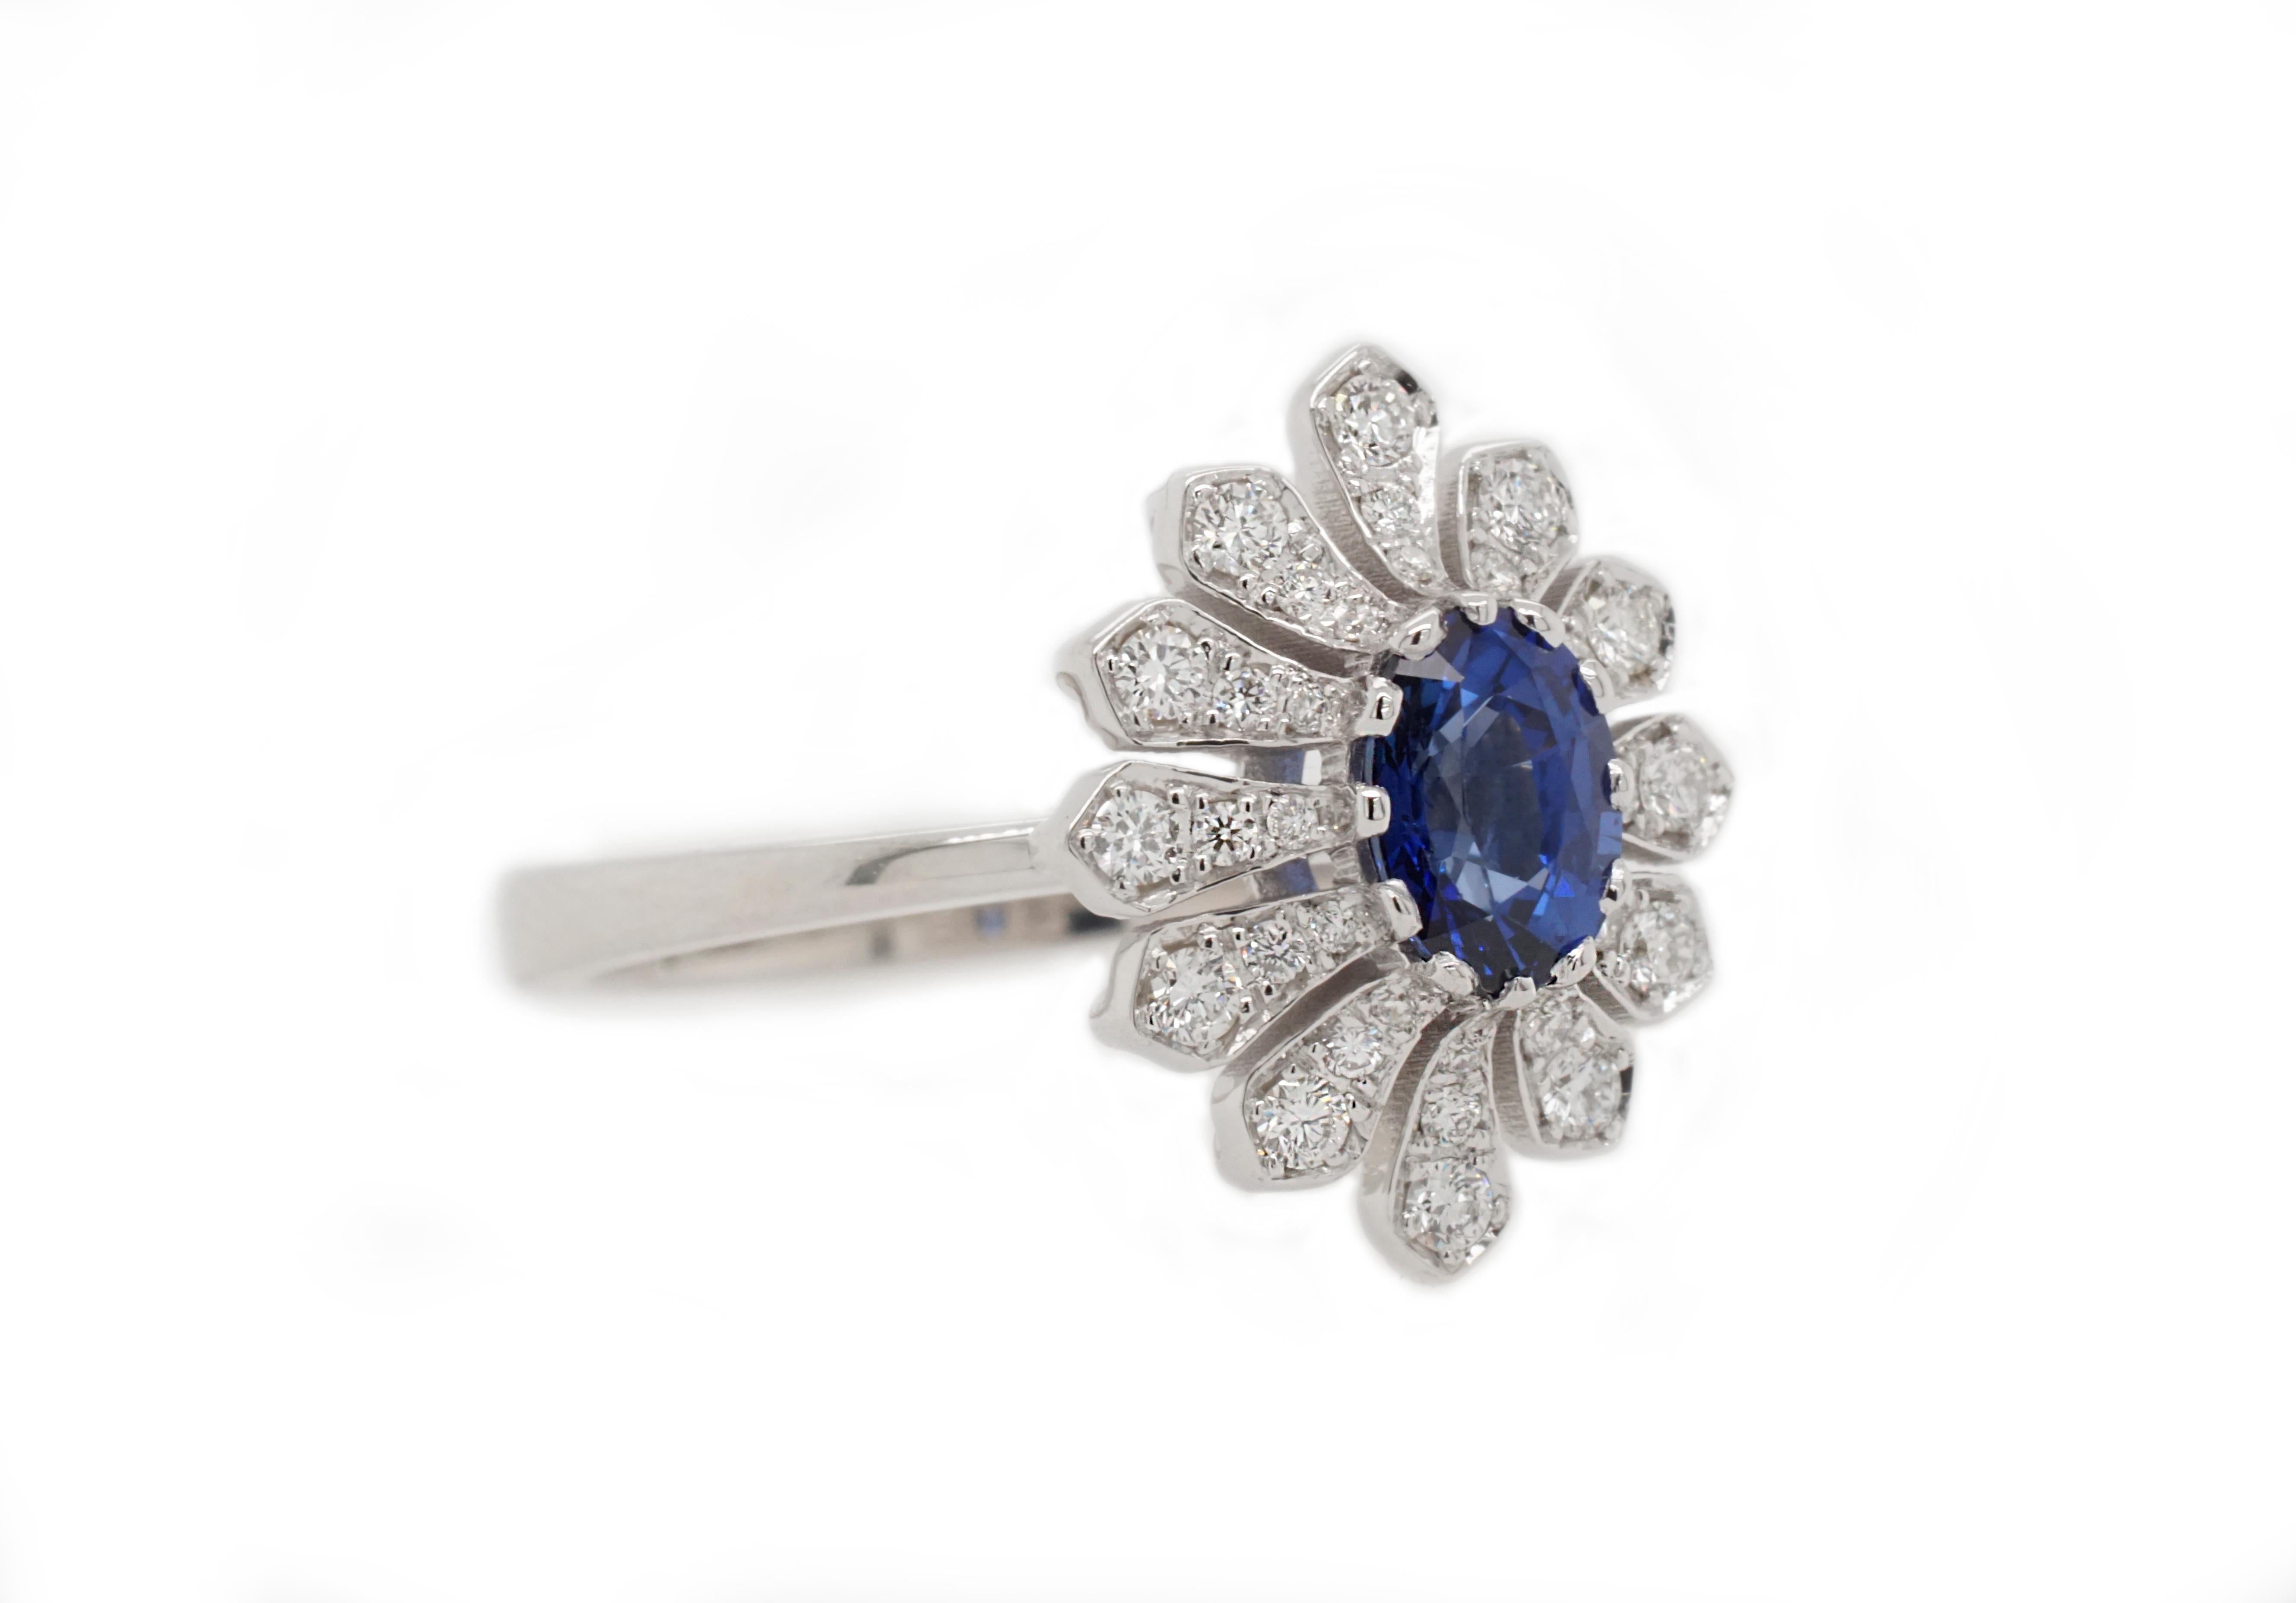 This beautiful ring flaunts a 0.84 carat oval-cut natural deep blue Sapphire. White round brilliant diamonds are set on the petals surrounding it, creating an Art Deco-inspired flower shape. 

Set in 14K white gold. 

Center stone: Natural heated